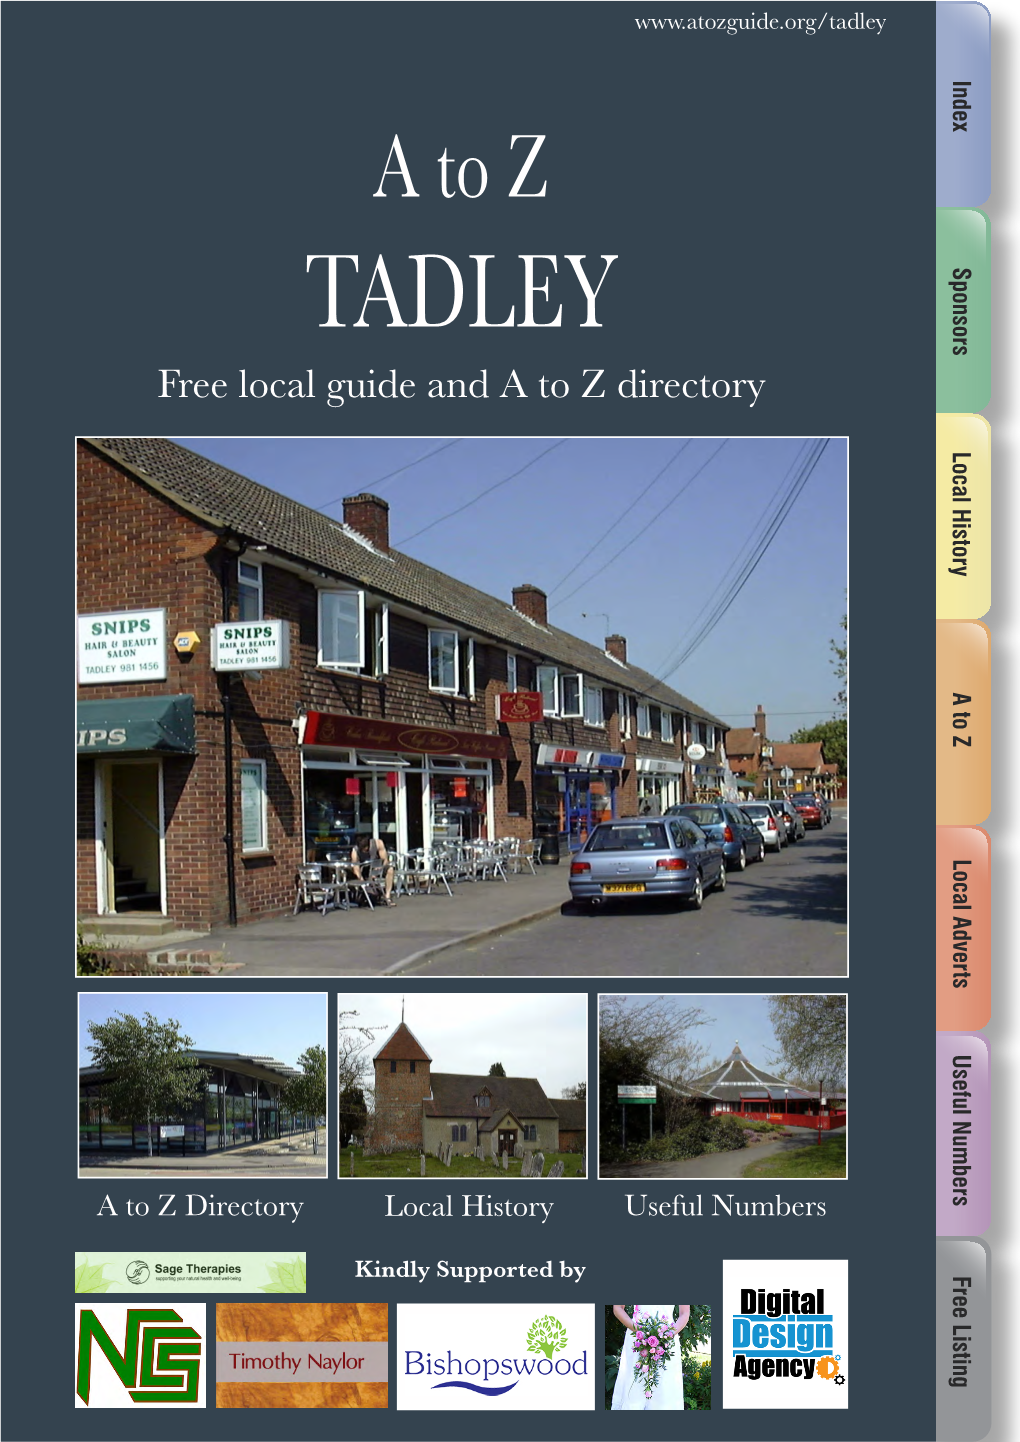 TADLEY Free Local Guide and a to Z Directory Local Guide Free a to Z Directory TADLEY a to Z GUIDE INDEX INDEX Index Contents